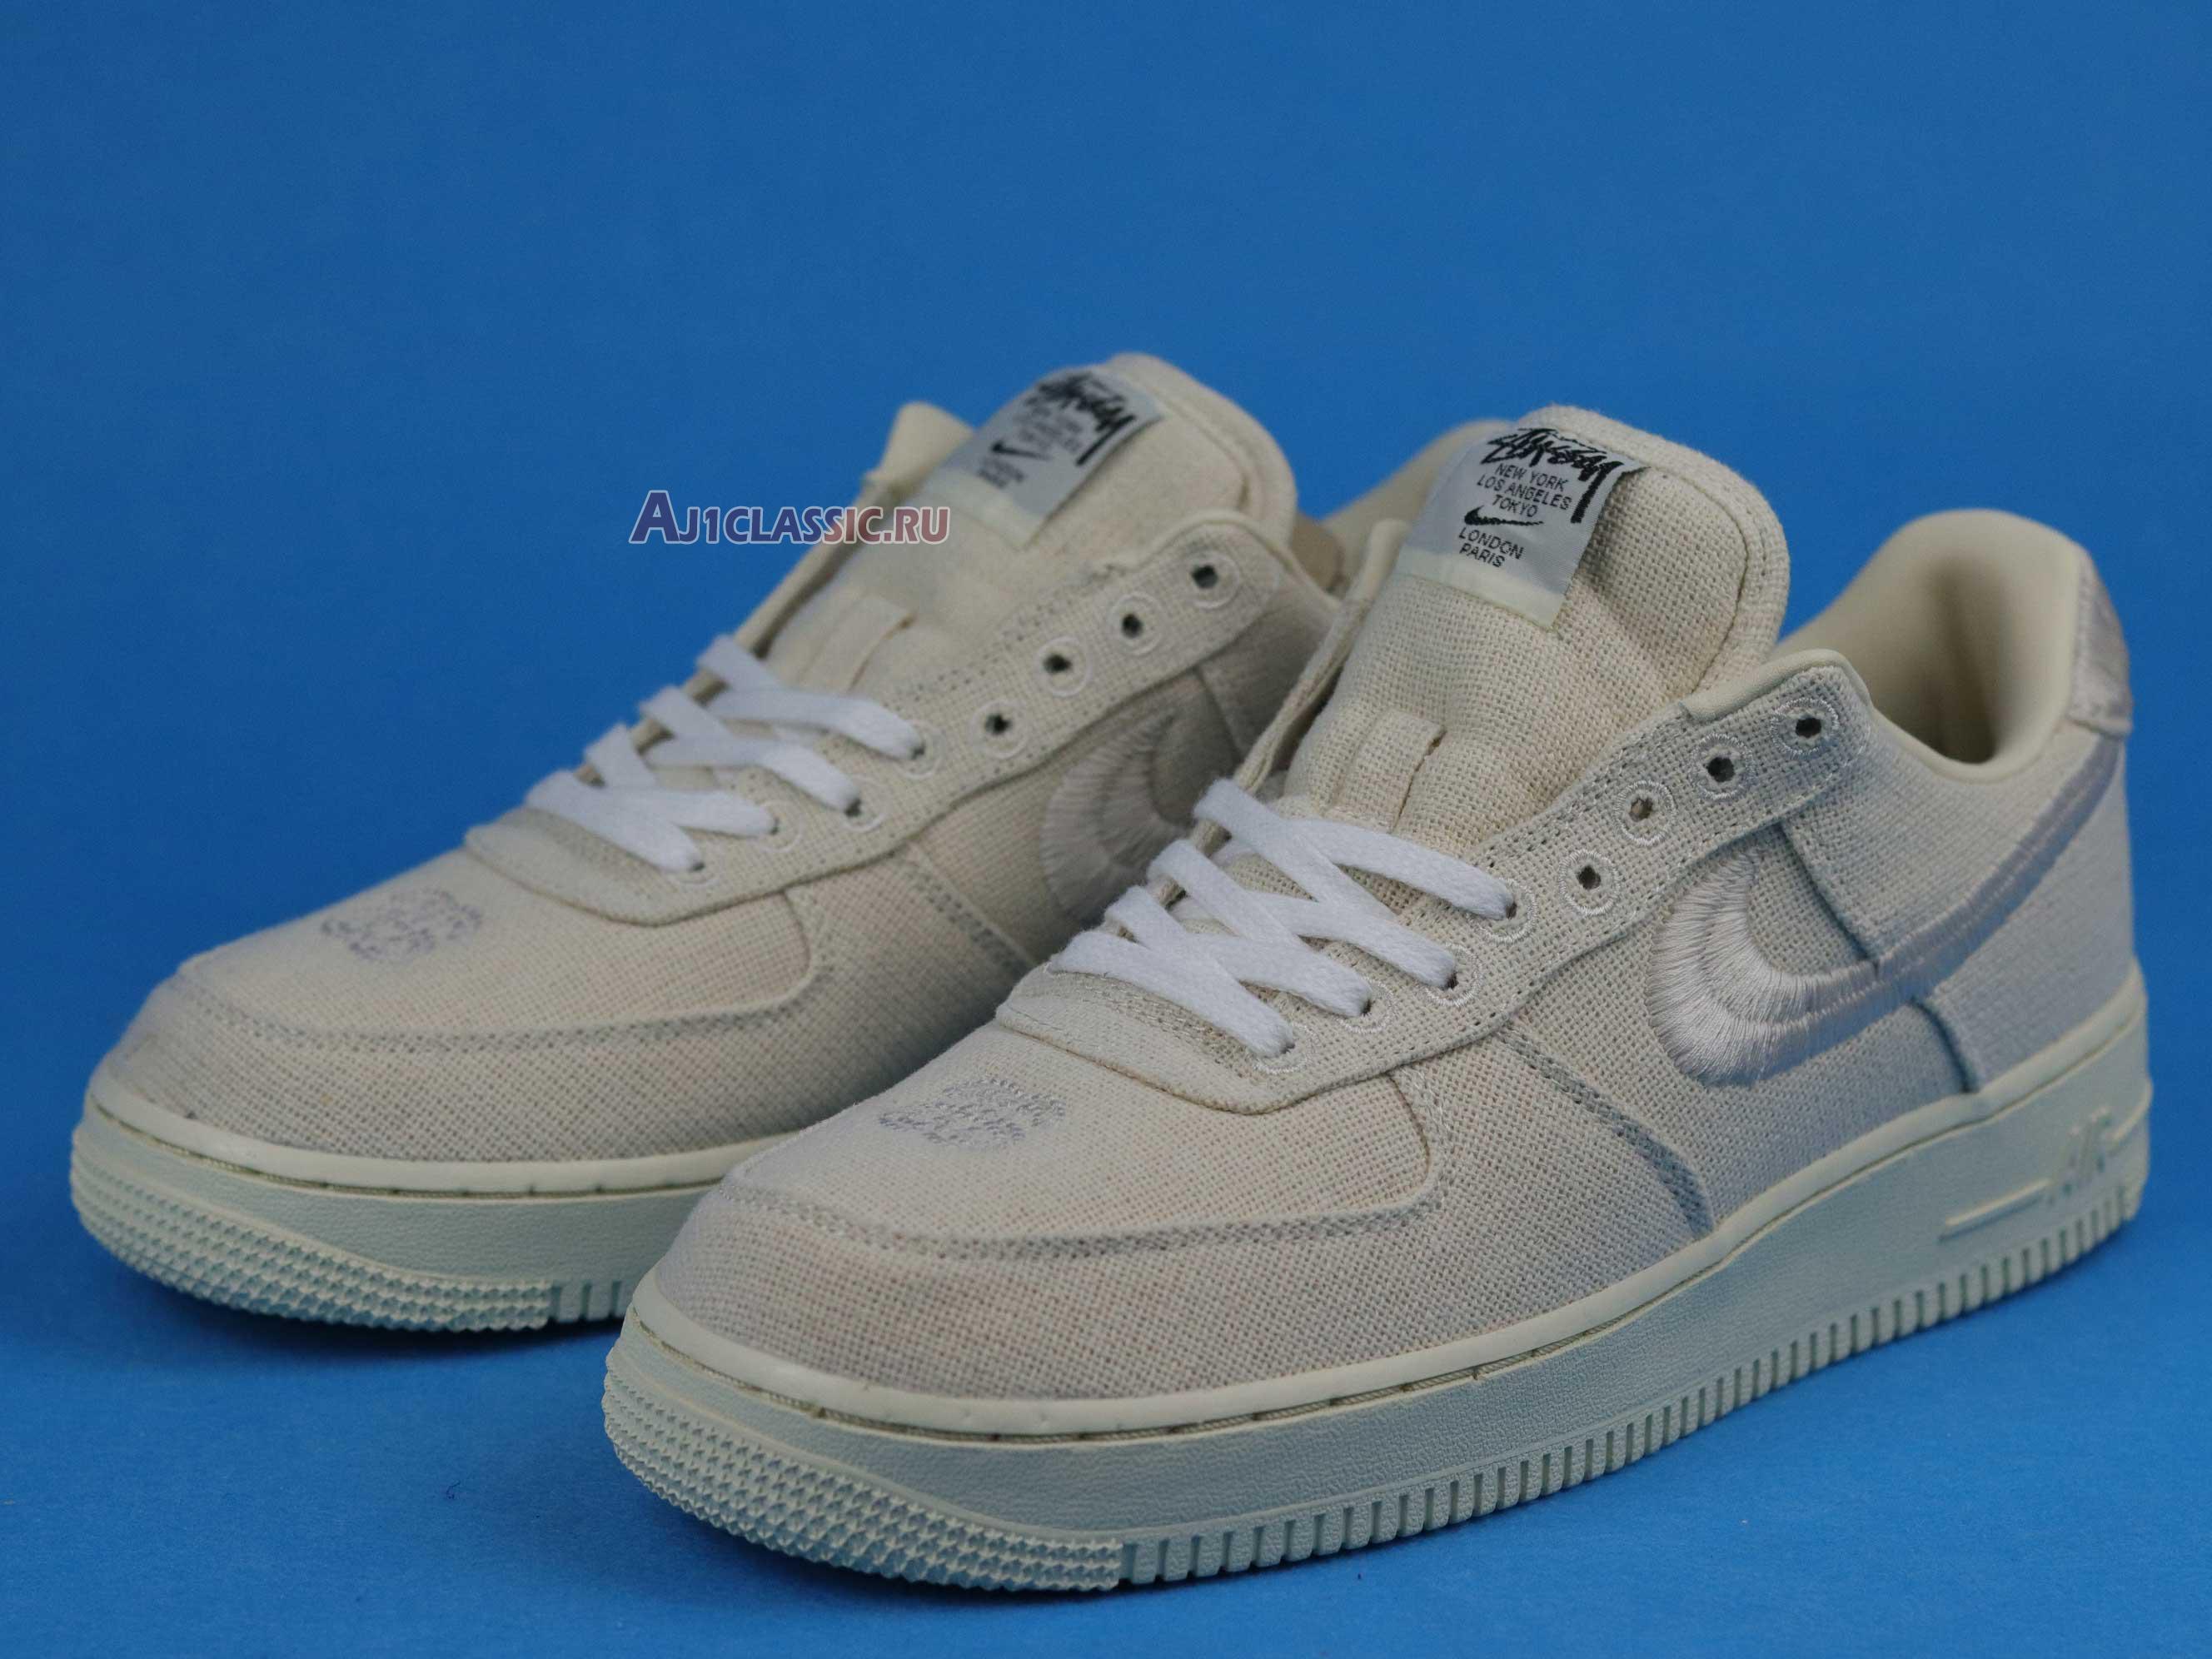 Stussy x Nike Air Force 1 Low "Fossil" CZ9084-200